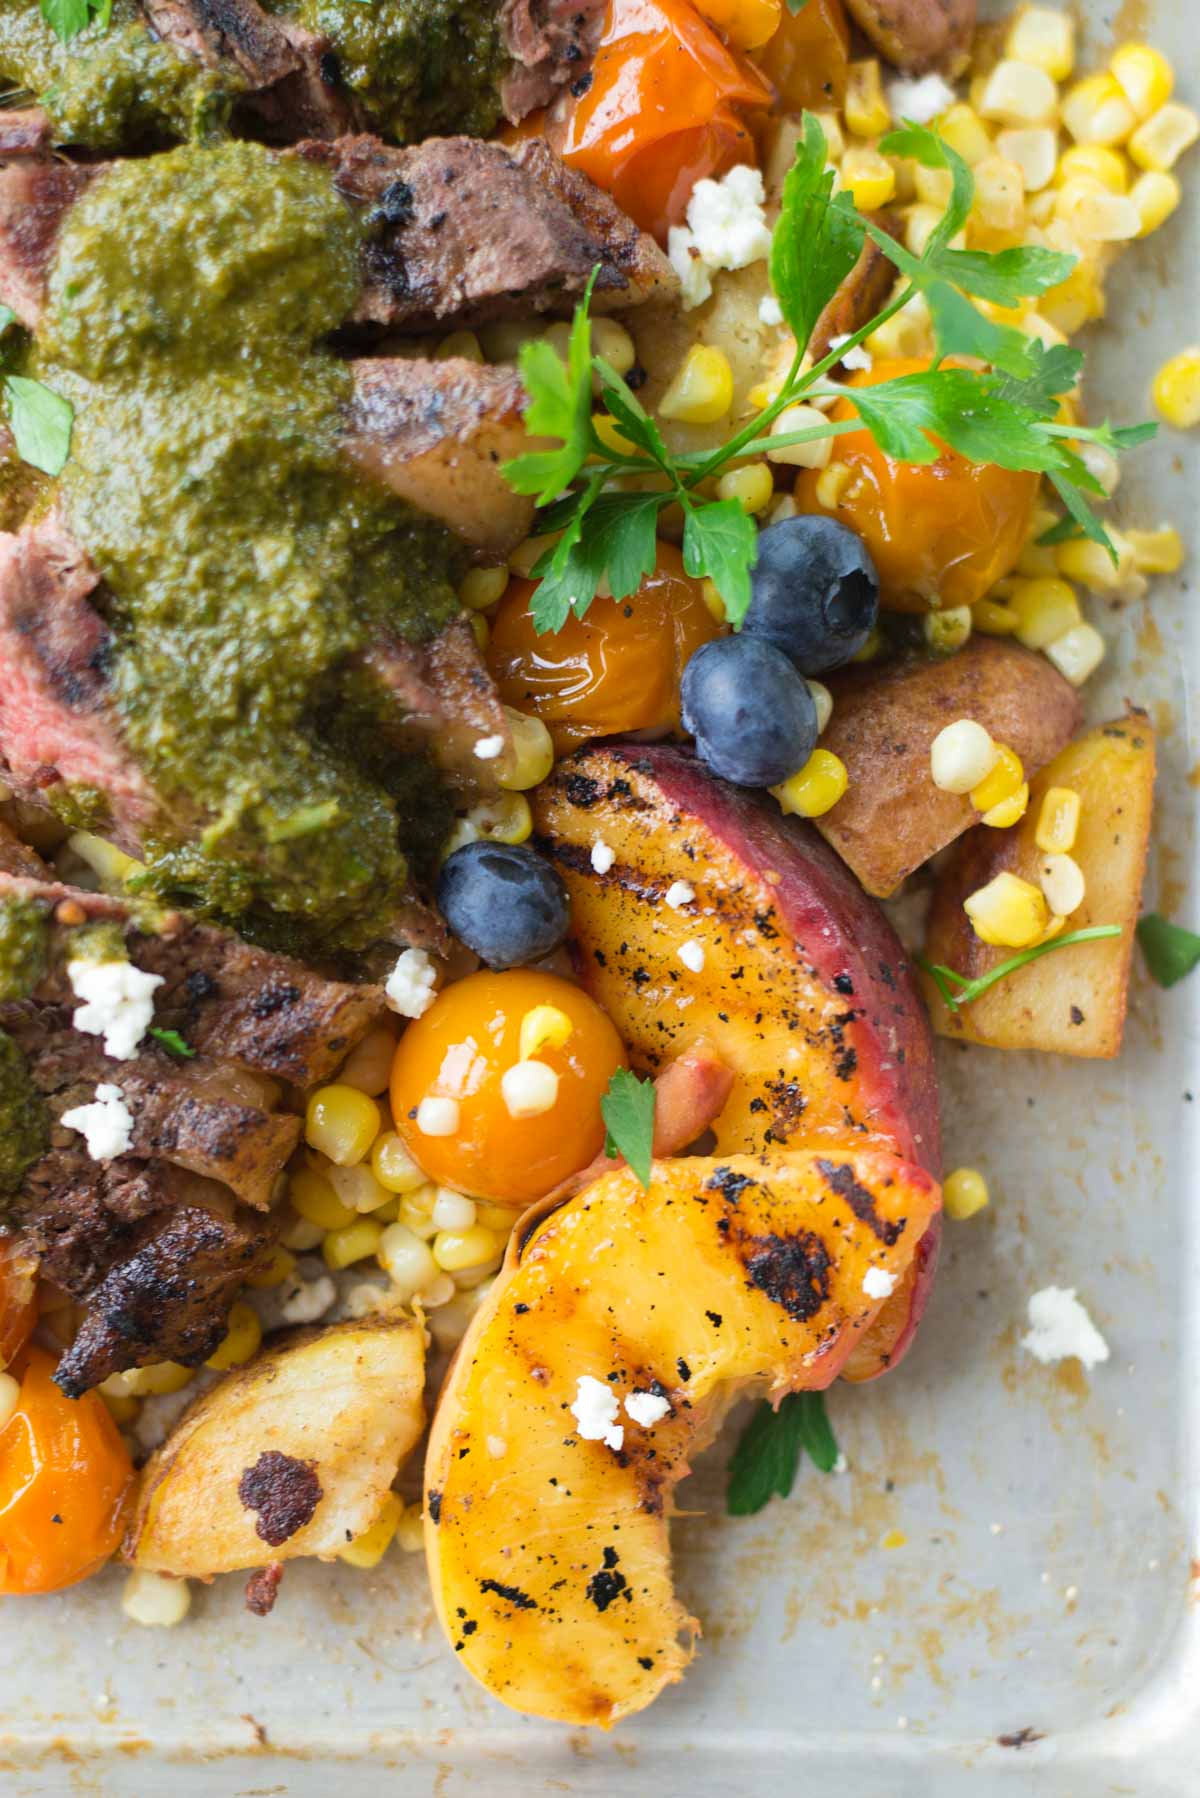 Looking for 30 minute week night dinner? Check out this recipe full of summer produce.